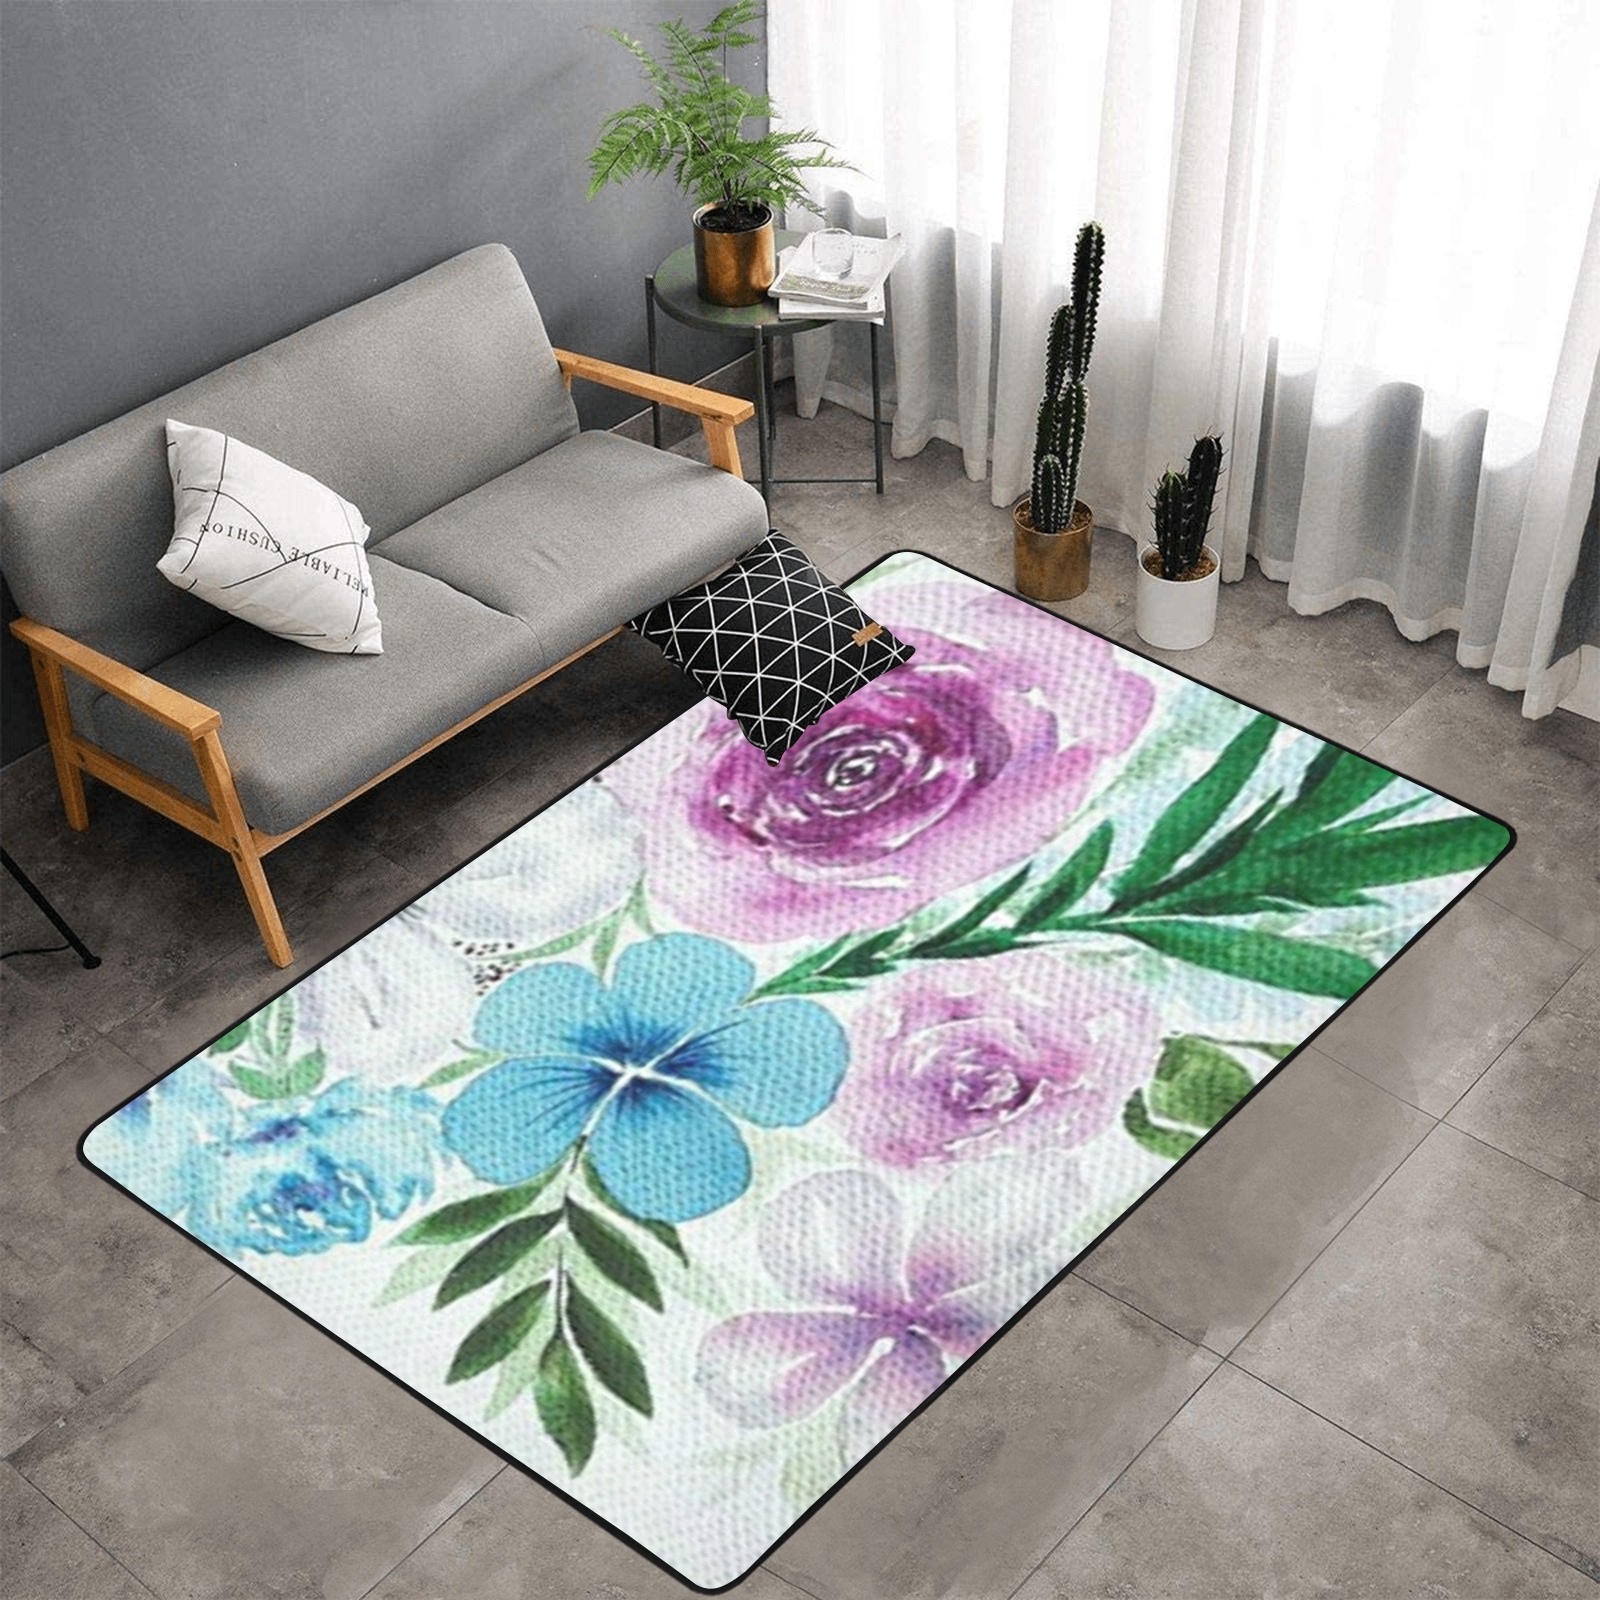 floral Area Rug with Black Binding 7'x5'